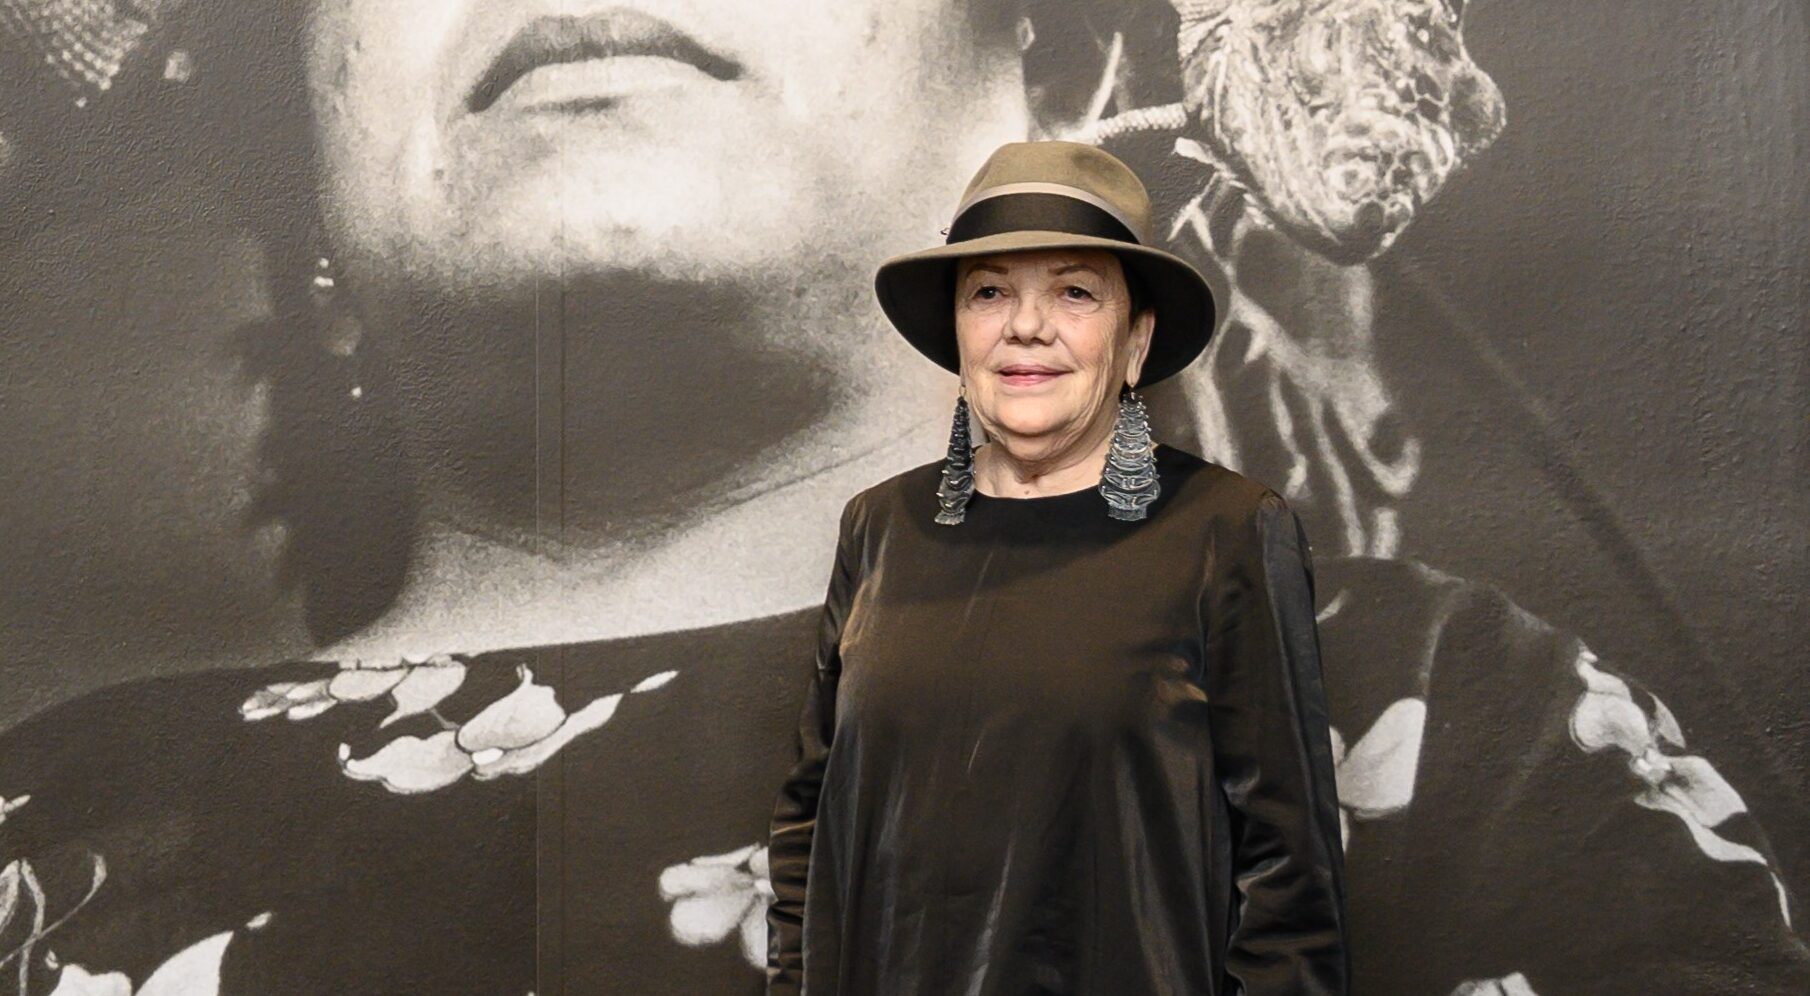 A woman in a fedora and a long black dress poses in front of a large black-and-white photograph of a woman wearing a floral dress and a large headdress who is standing, looking upward.